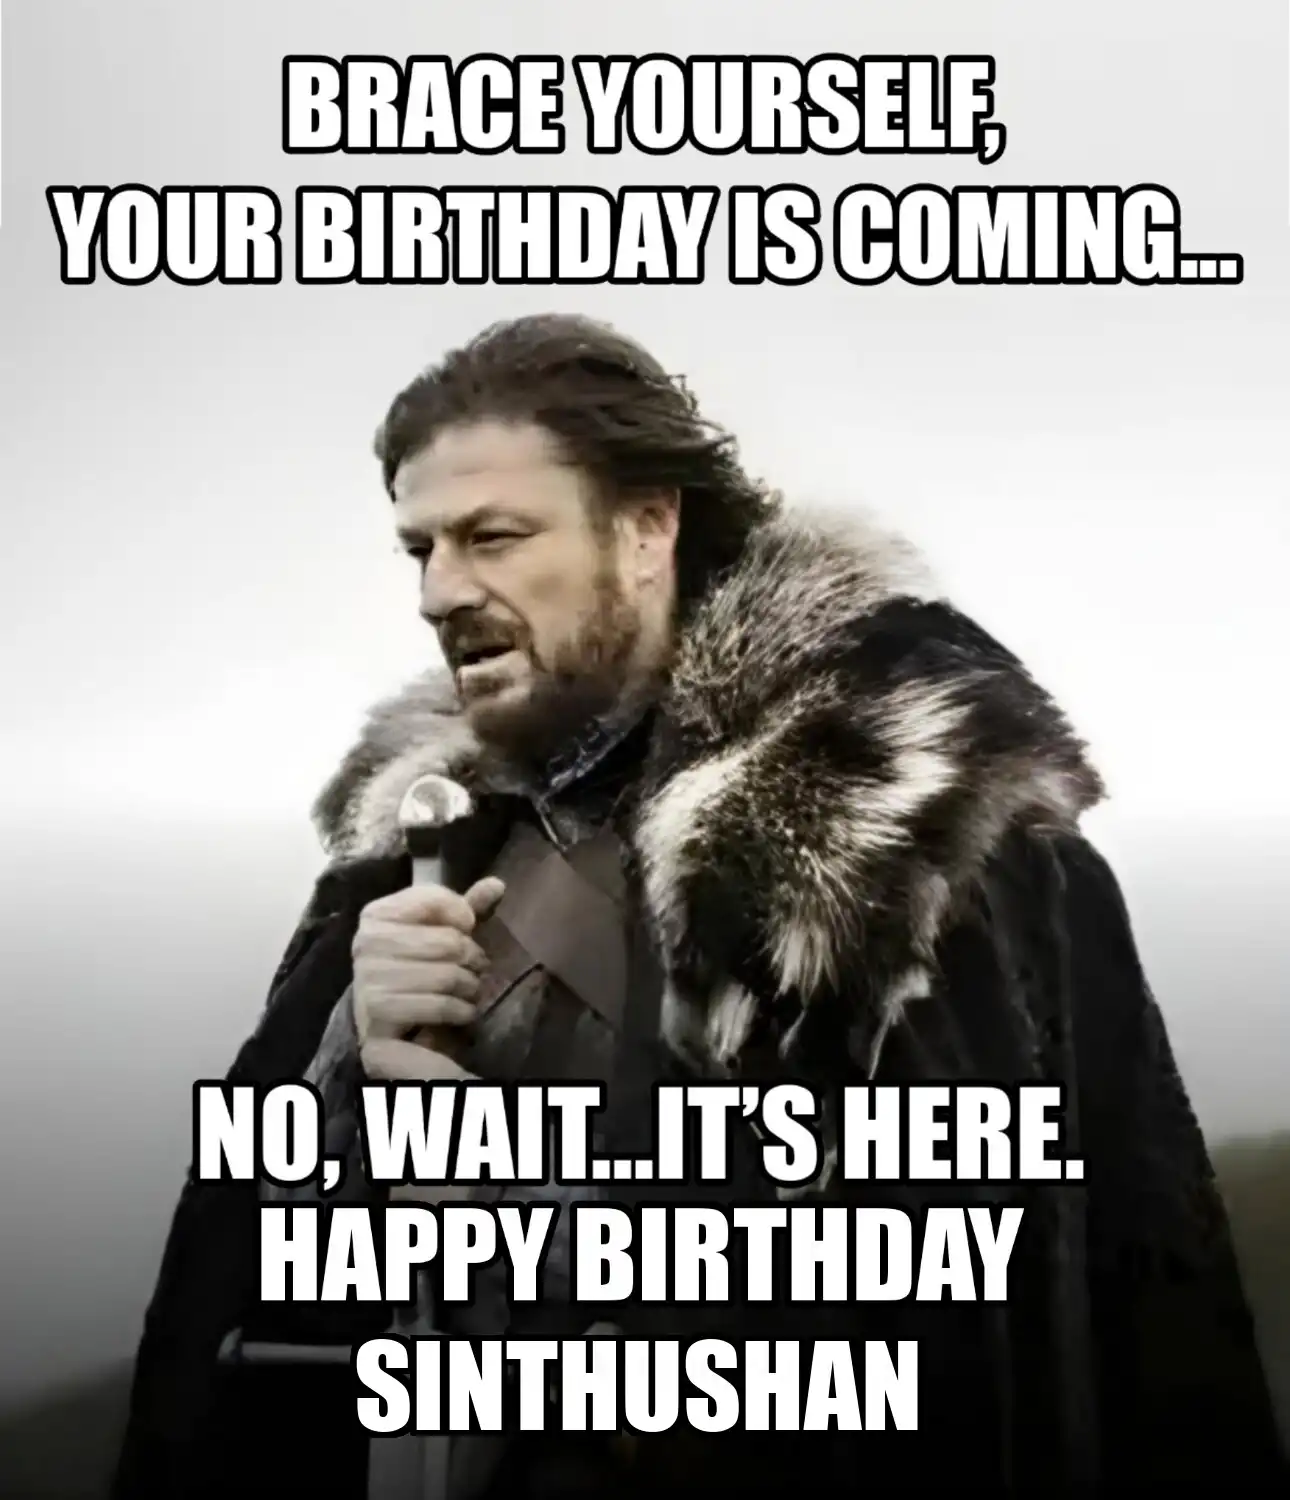 Happy Birthday Sinthushan Brace Yourself Your Birthday Is Coming Meme